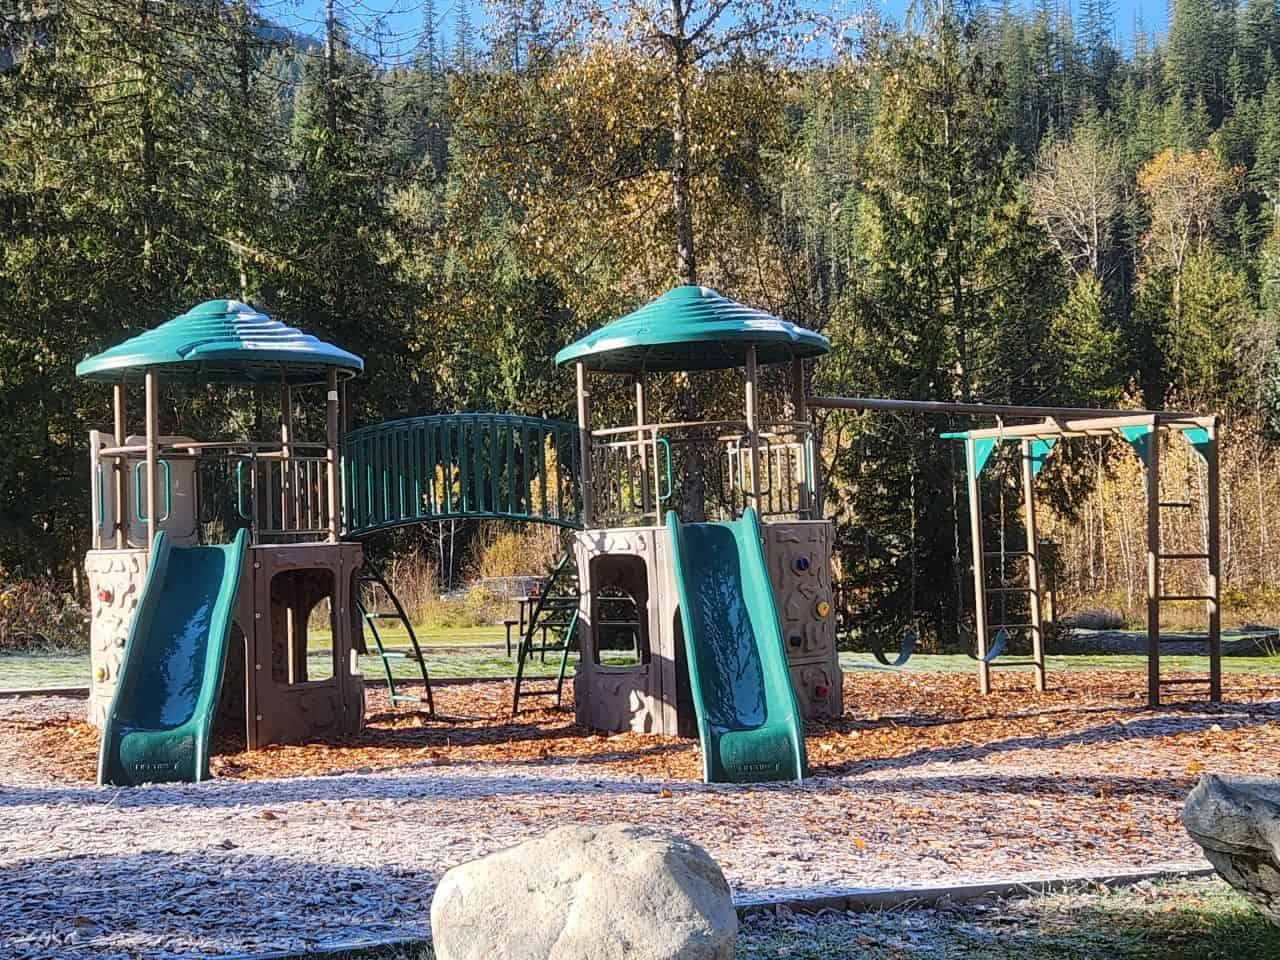 Playground at Crazy Creek Hot Springs and Resort near Revelstoke BC Canada